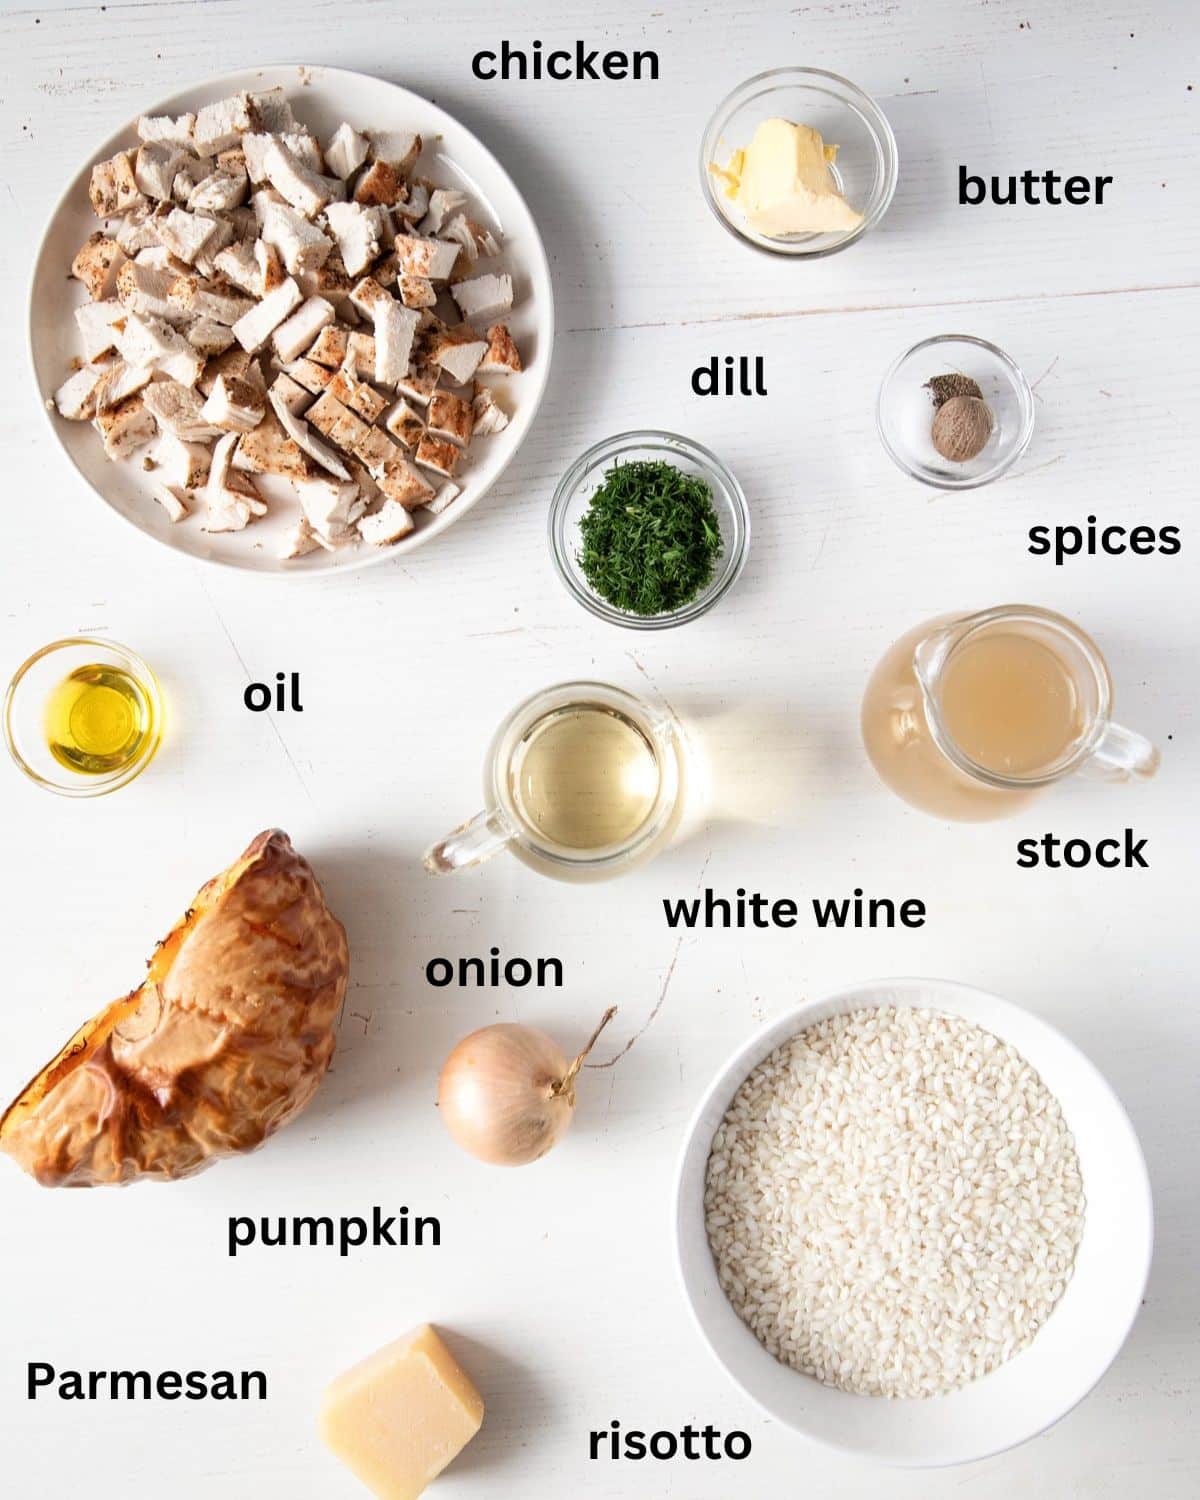 listed ingredients for risotto with cooked chicken, baked pumpkin and parmesan.